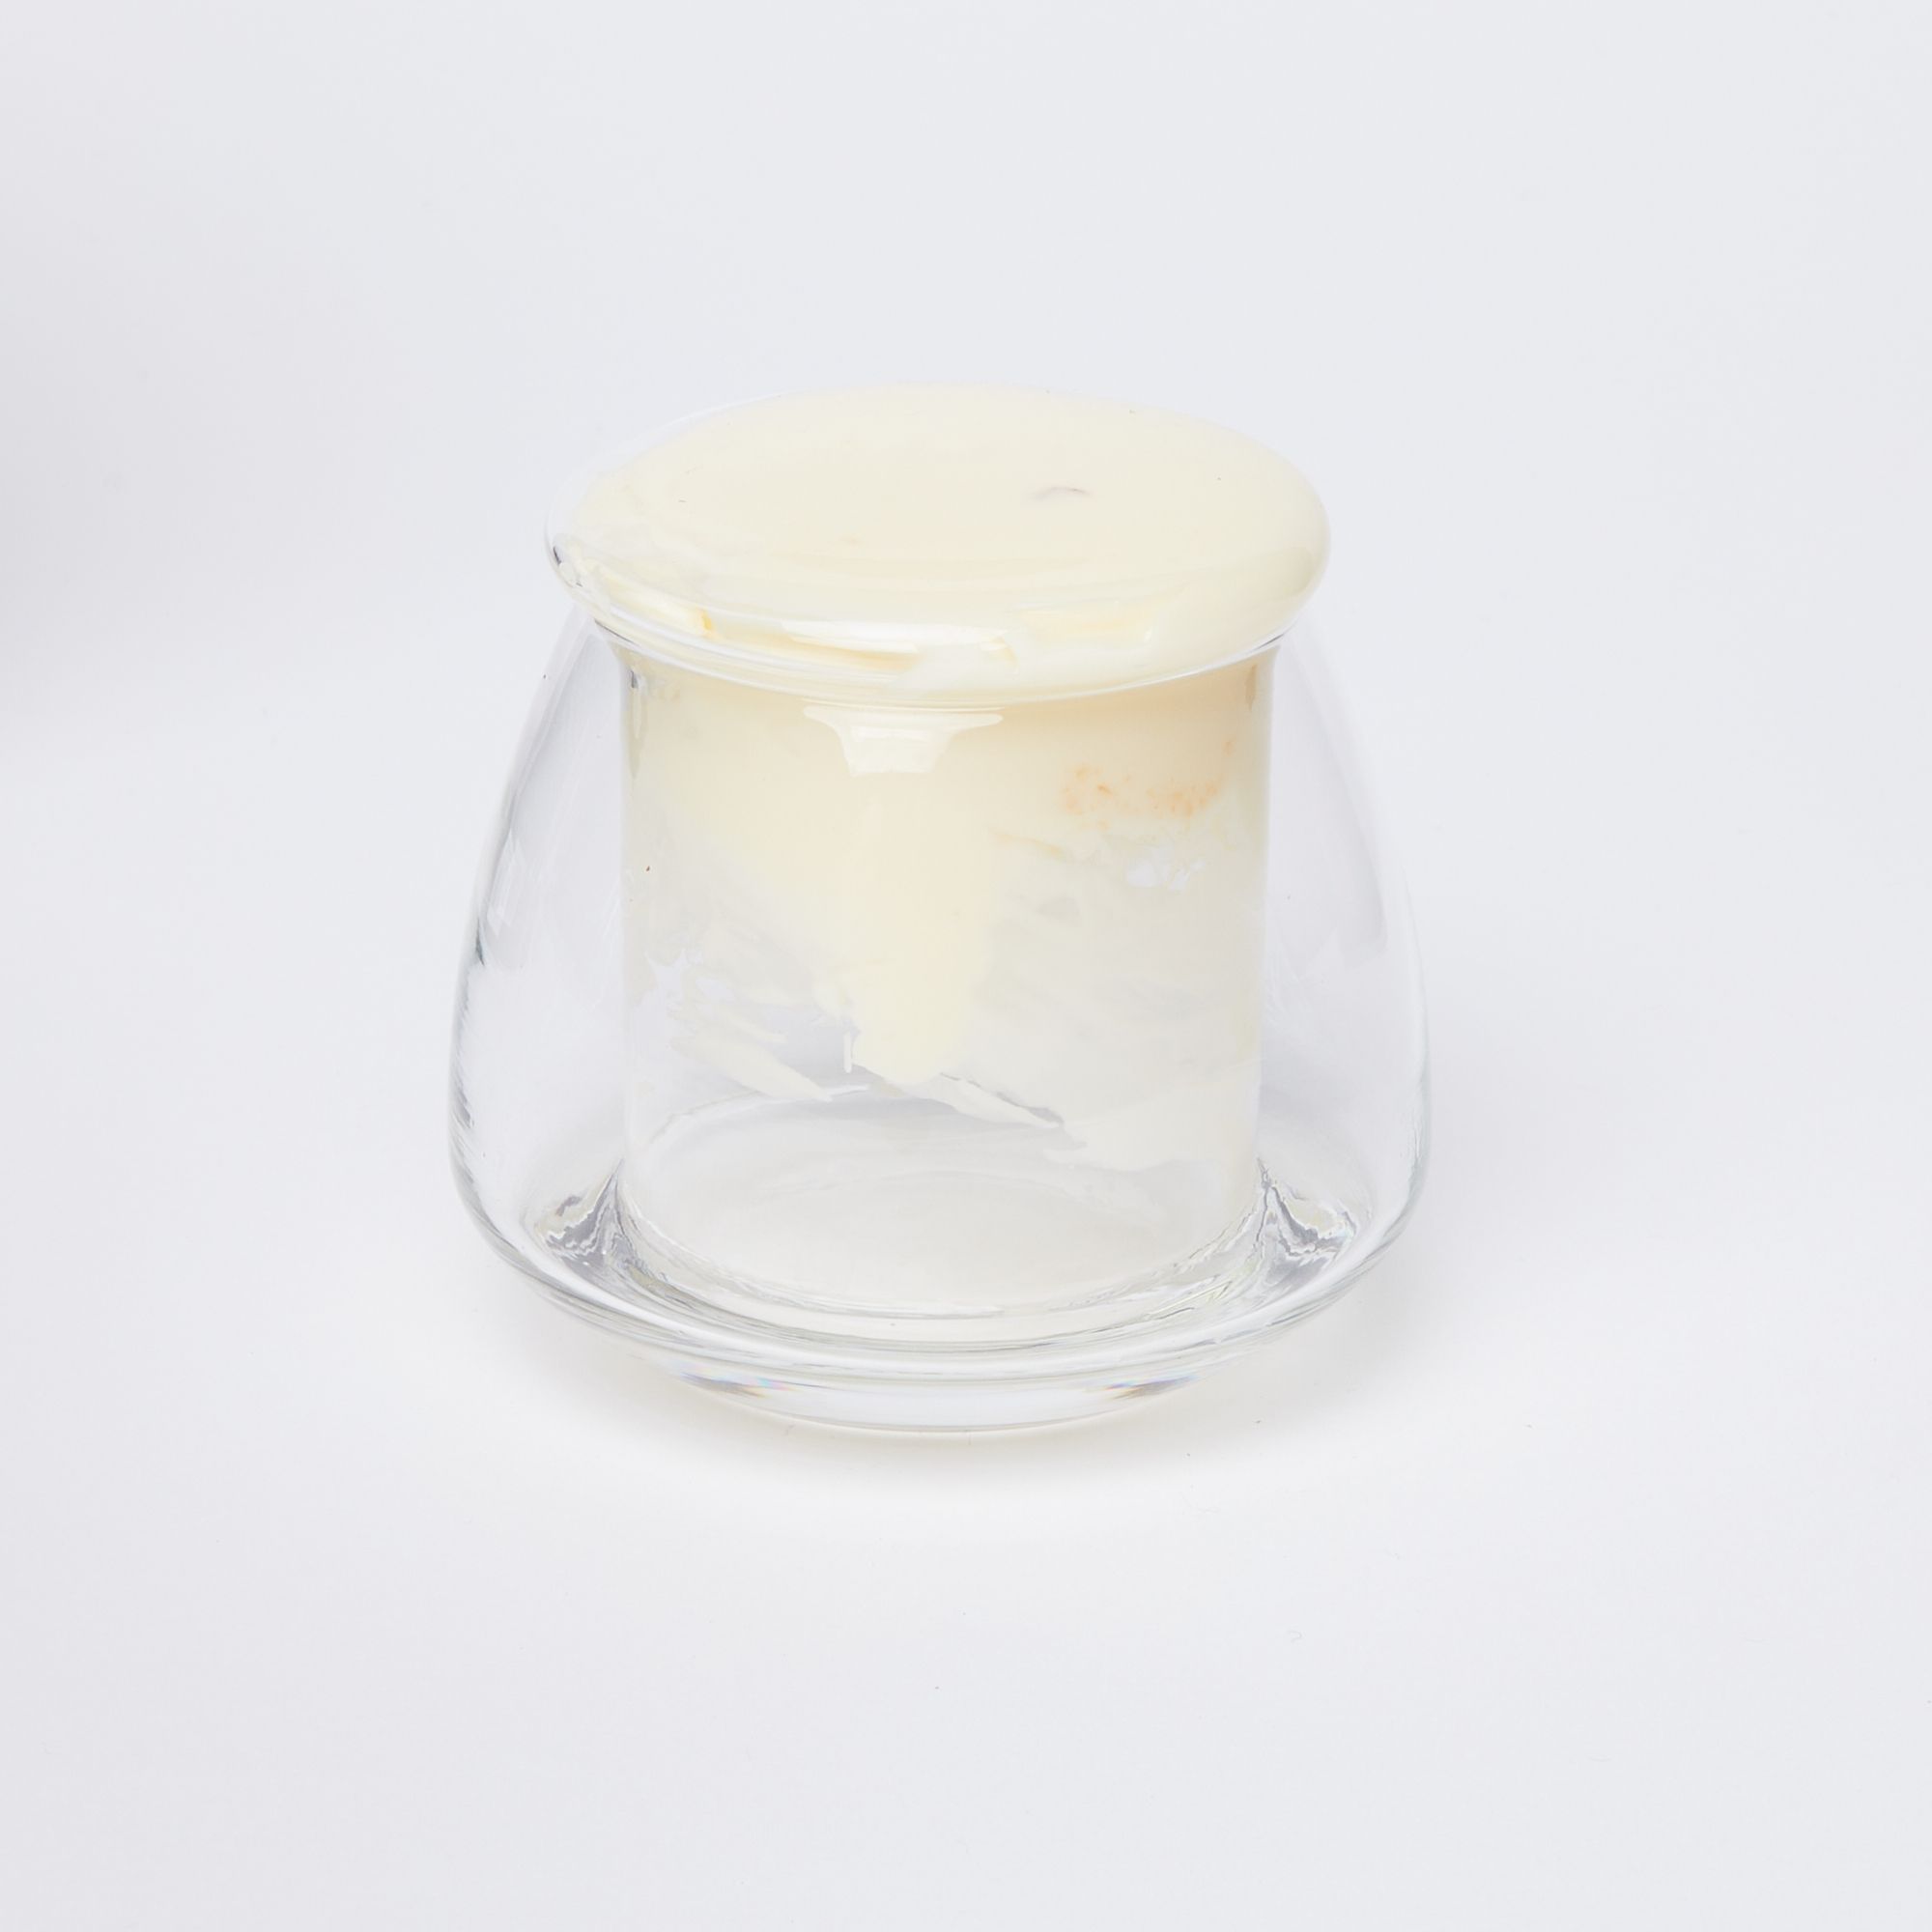 Clear glass butter keeper filled with light yellow butter